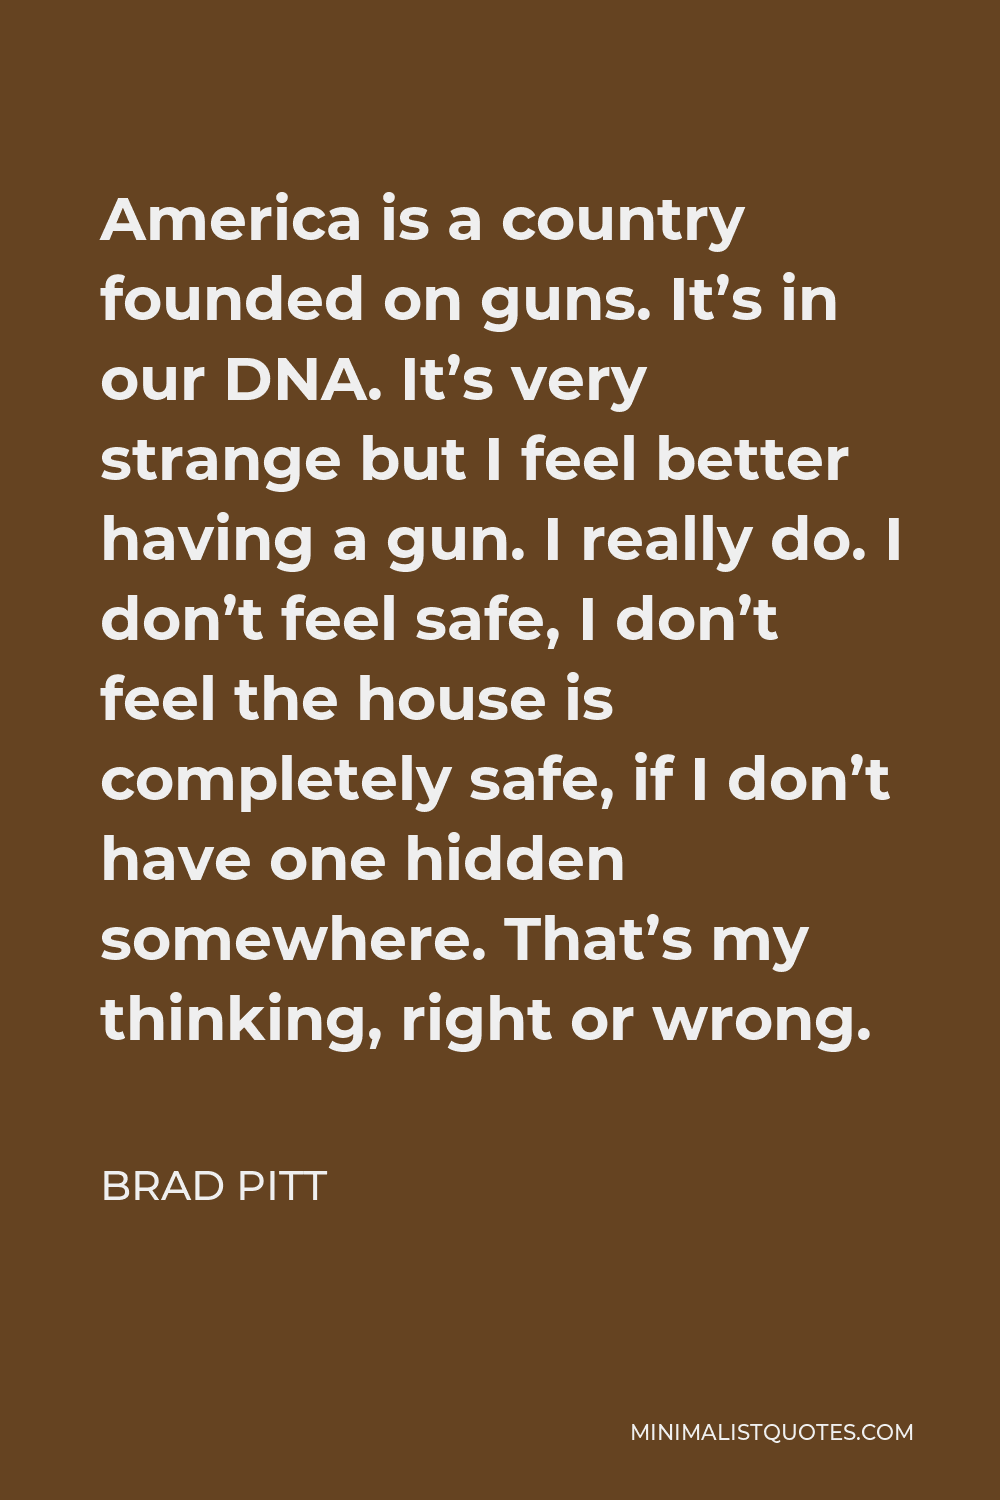 Brad Pitt Quote - America is a country founded on guns. It’s in our DNA. It’s very strange but I feel better having a gun. I really do. I don’t feel safe, I don’t feel the house is completely safe, if I don’t have one hidden somewhere. That’s my thinking, right or wrong.